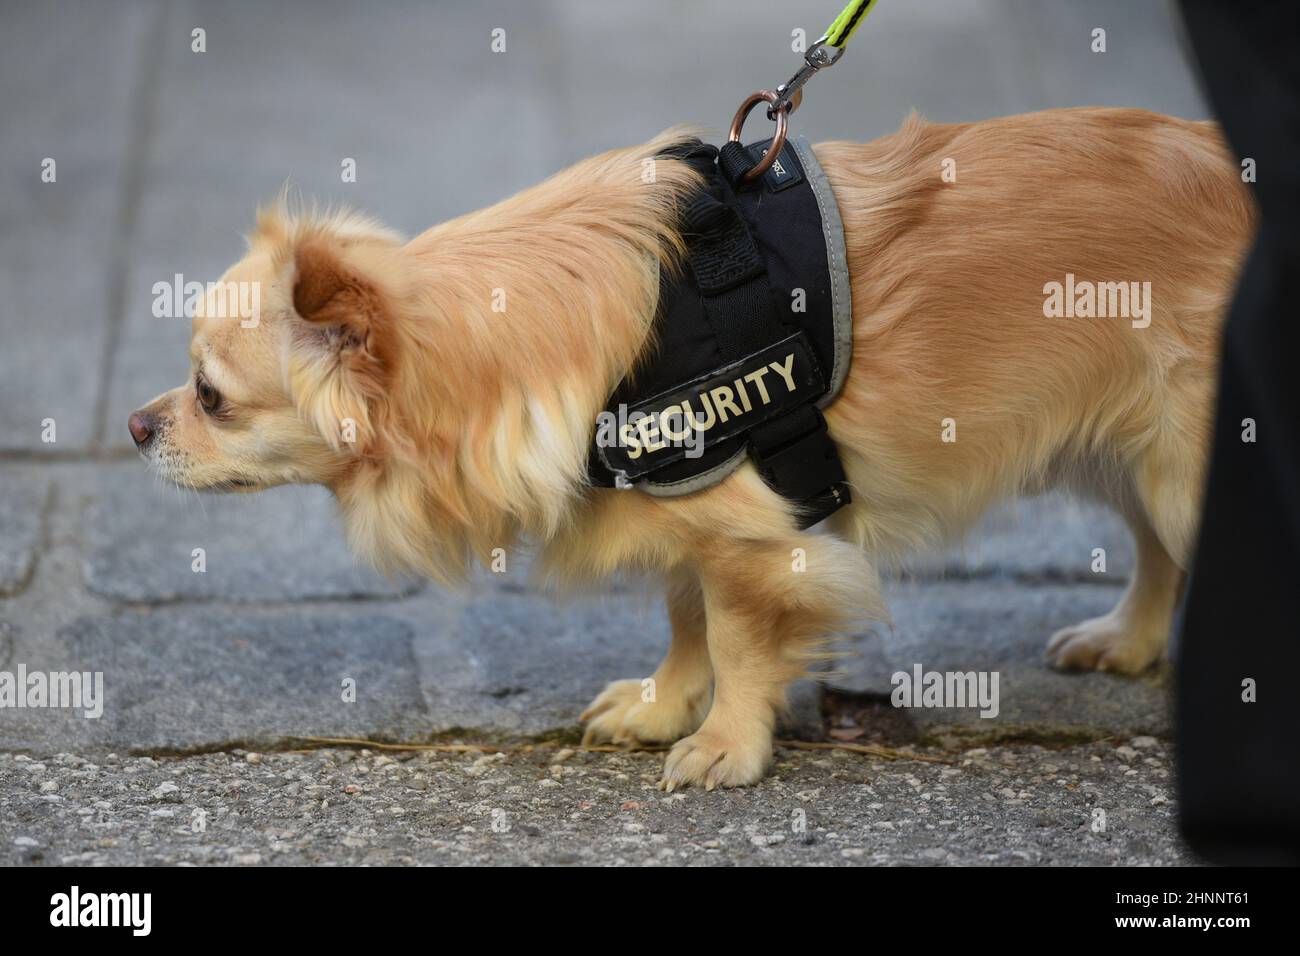 Hund mit Band 'Security' auf der Straße - Dog with 'Security' tape on the street Stock Photo